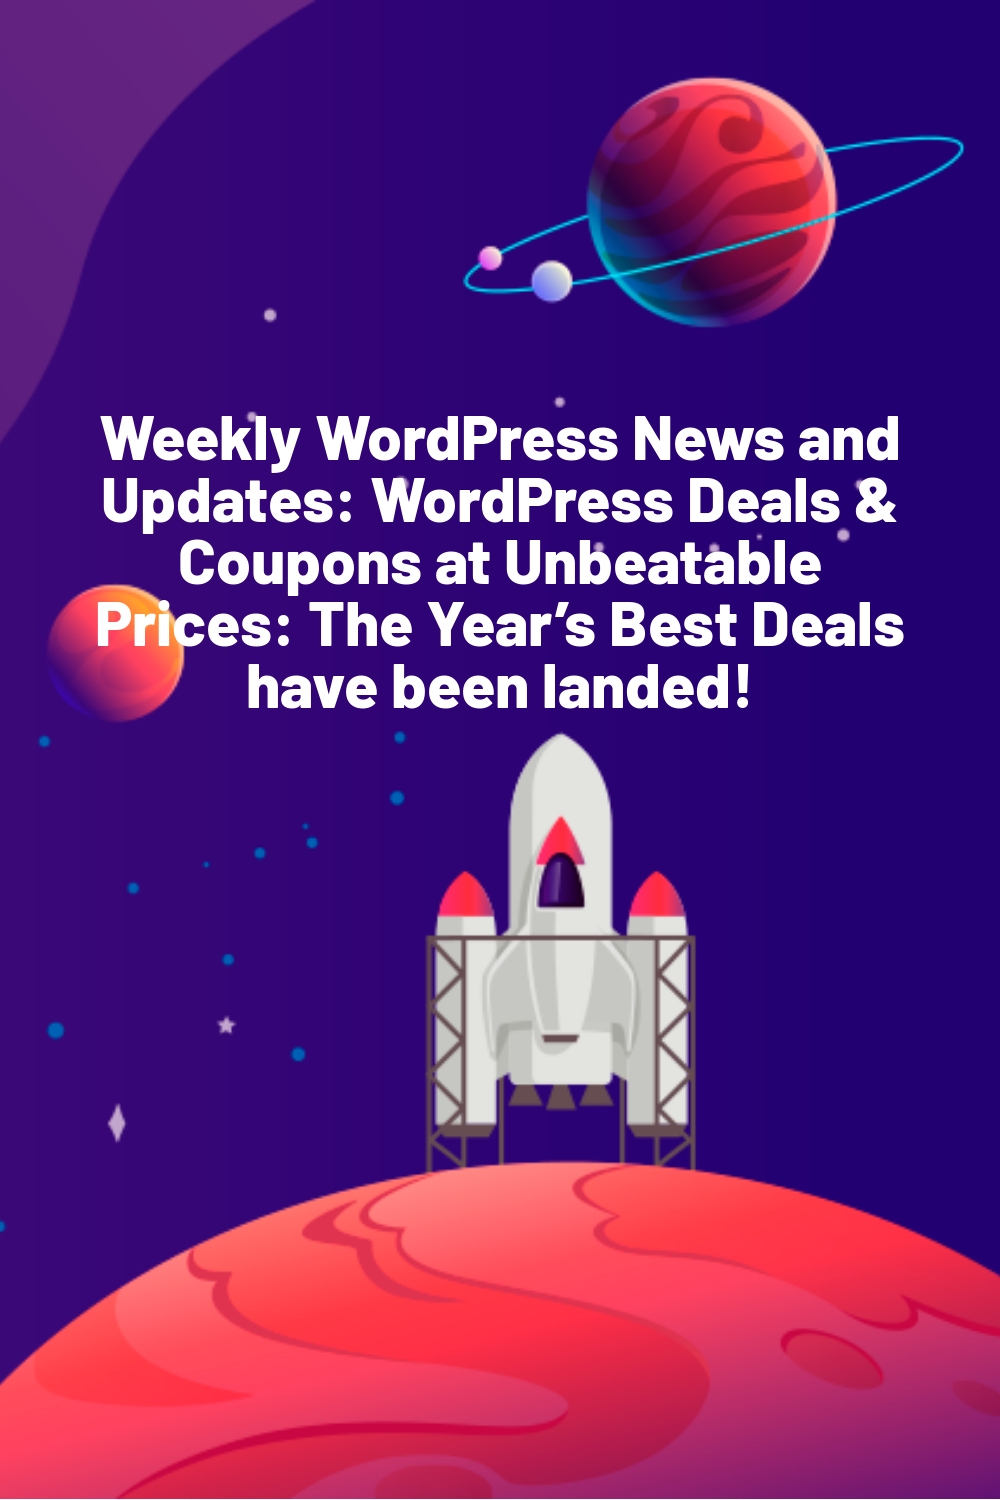 Weekly WordPress News and Updates: WordPress Deals & Coupons at Unbeatable Prices: The Year’s Best Deals have been landed!